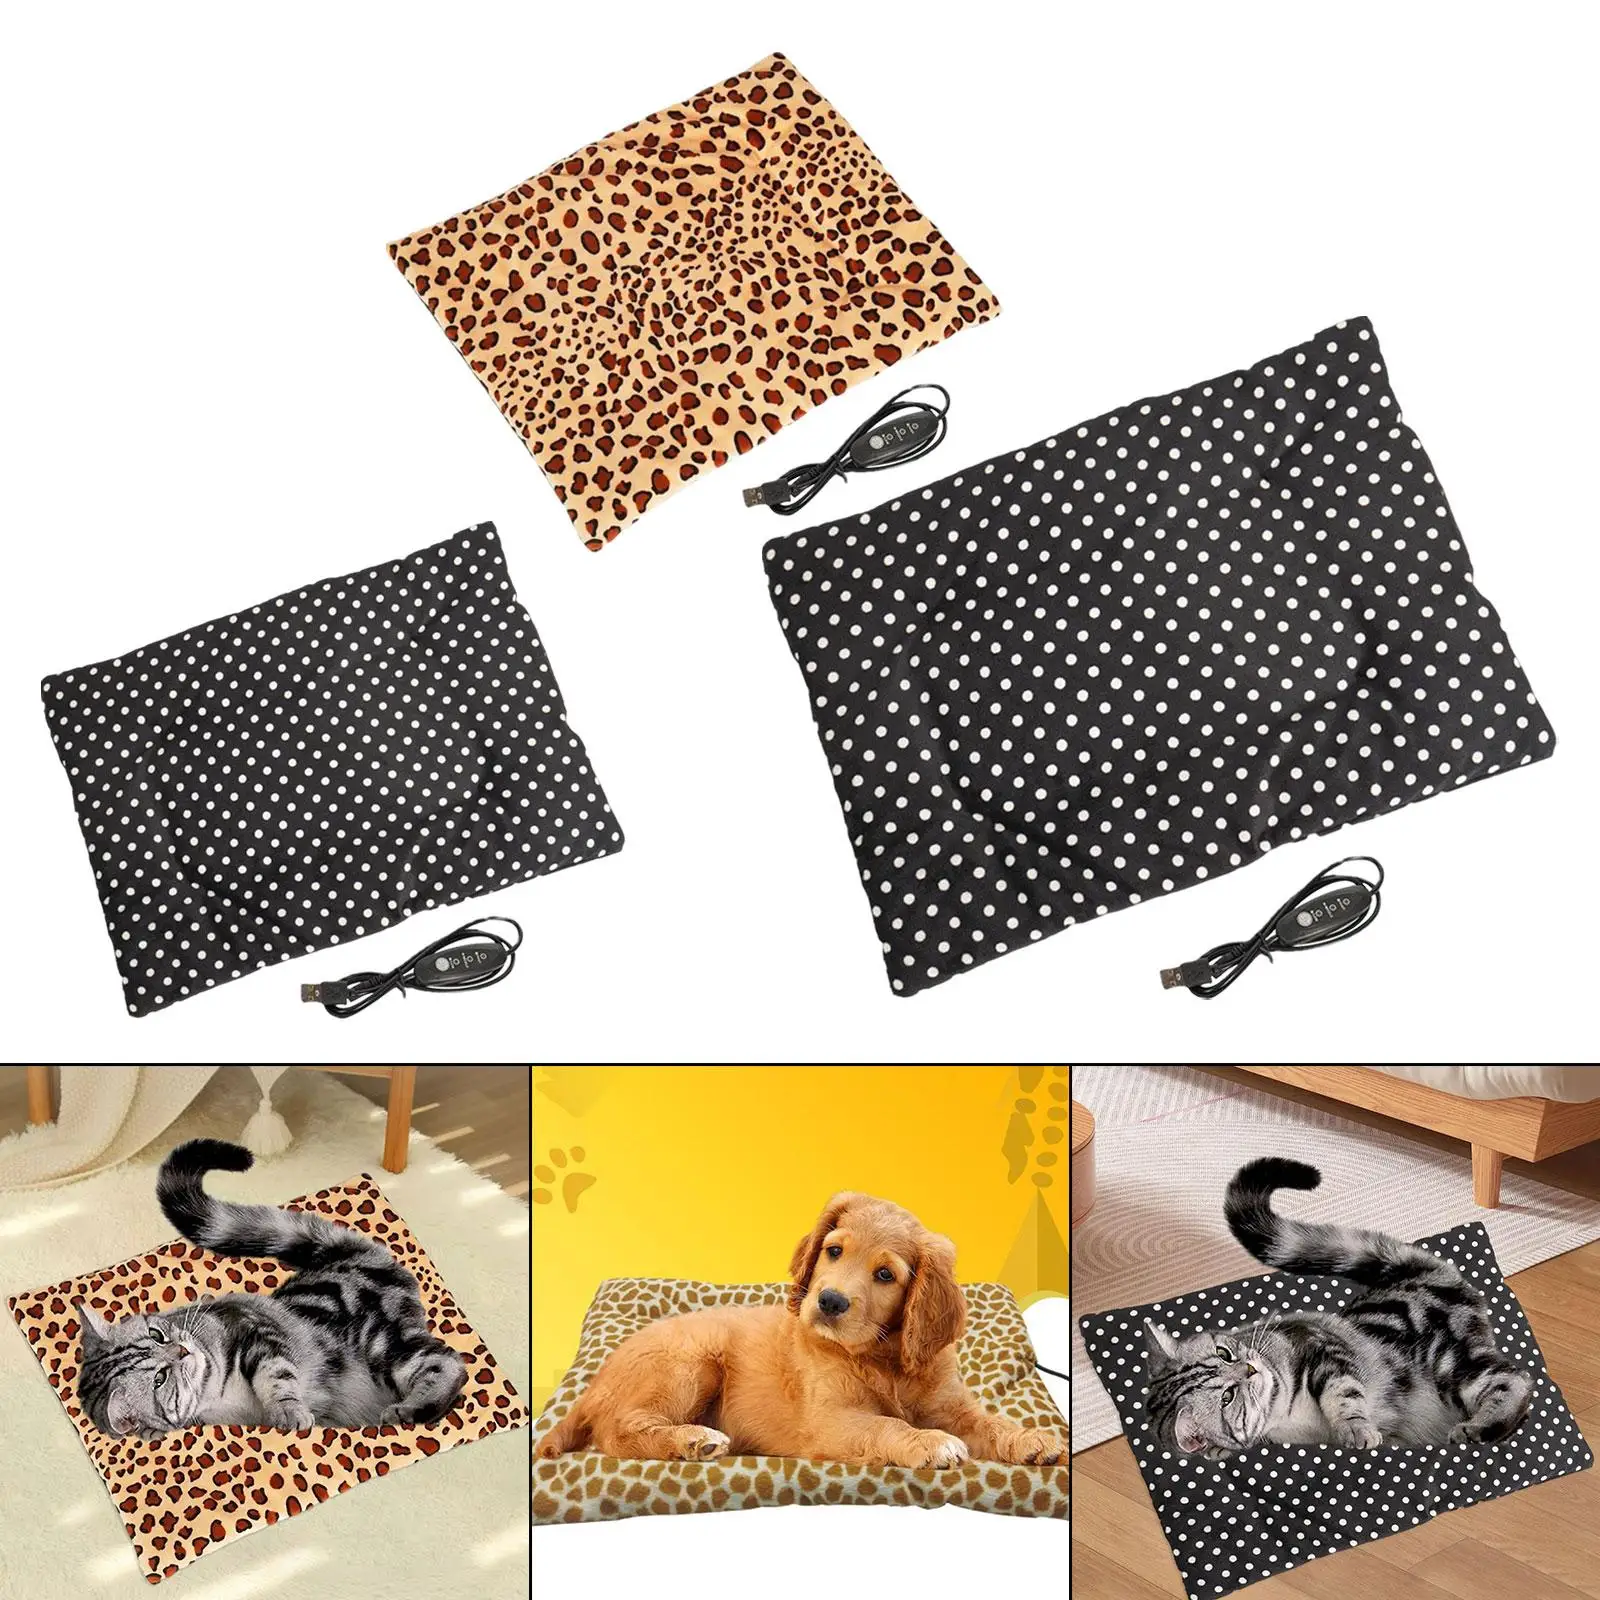 Pet Heating Pads Adjustable Temperature Crate Mat Winter Warm Cats Dogs Warmer Bed for Sleeping Kitty Other Animals Outside